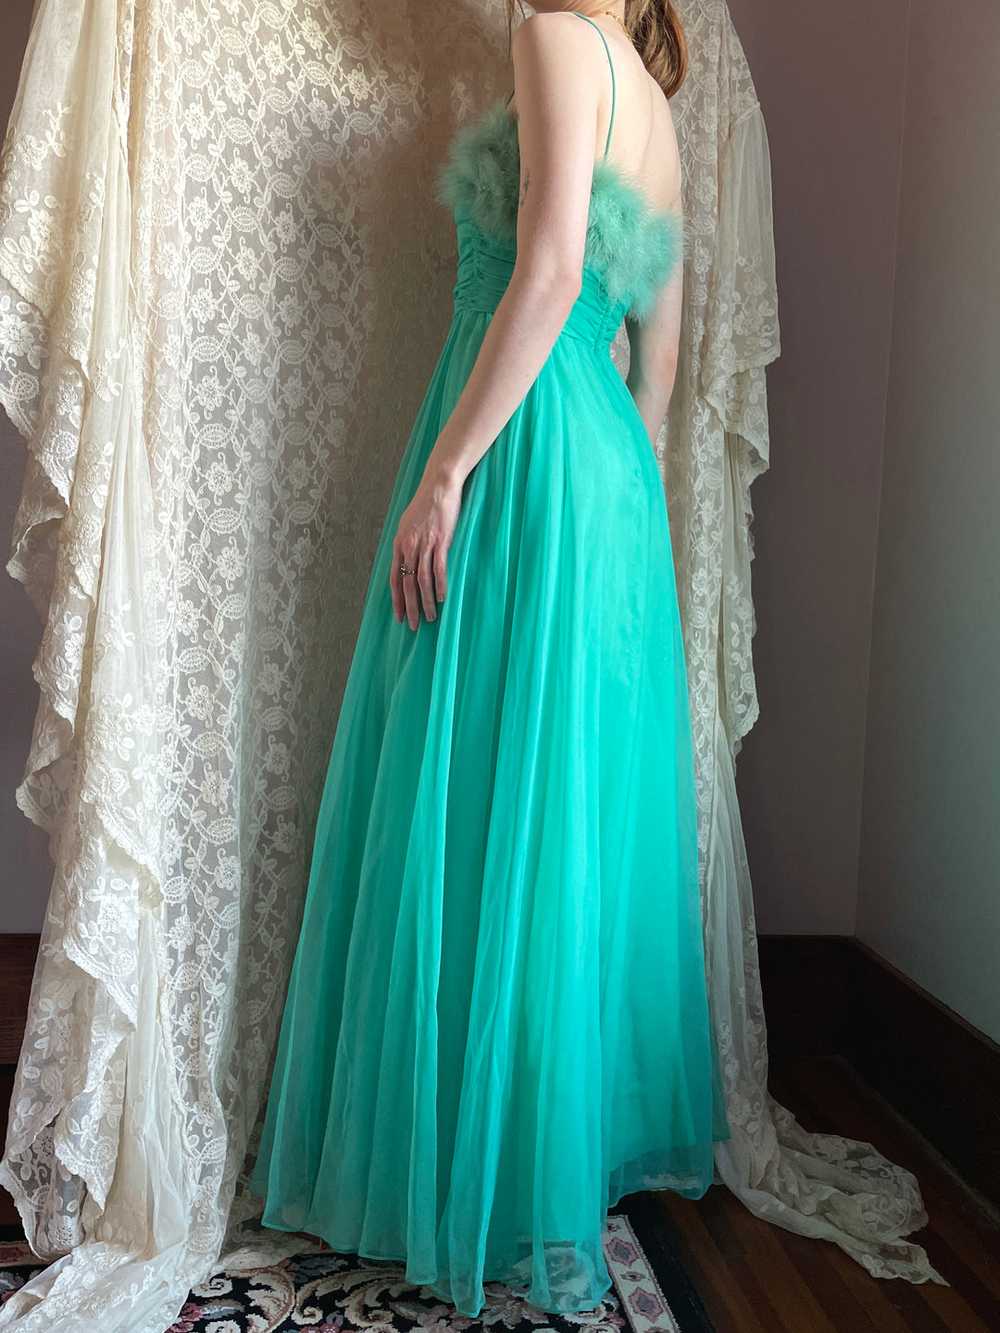 1960s Marabou Feather Green Chiffon Gown Dress - image 12